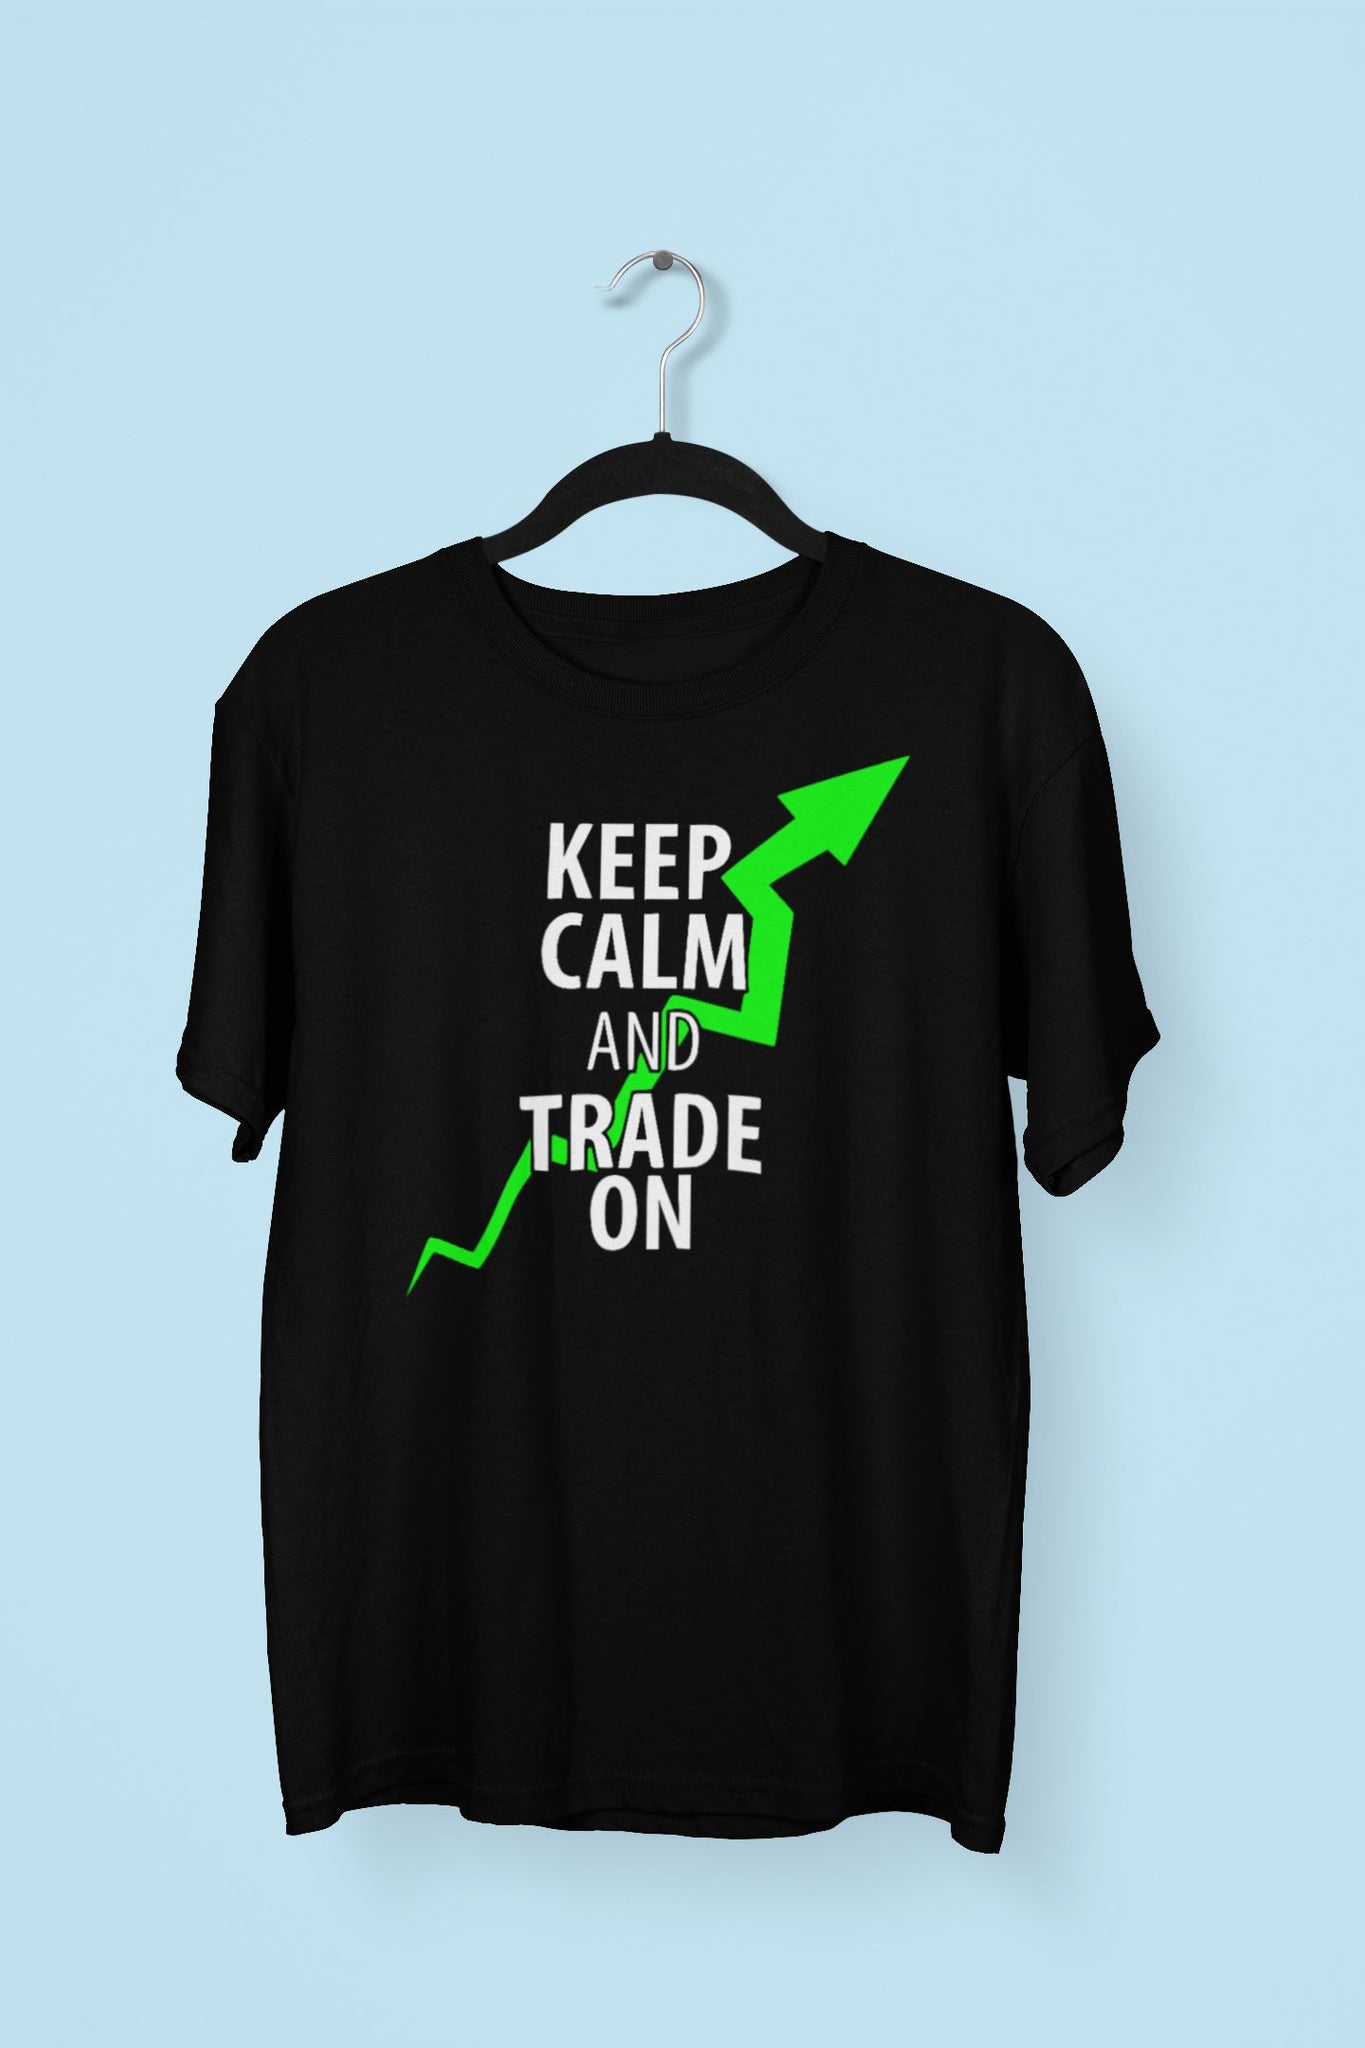 Keep Calm and Trade Down Exclusive Black T Shirt for Men and Women - Catch My Drift India  black, bse, clothing, female, made in india, nifty, nse, sensex, shirt, stock market, t shirt, trade